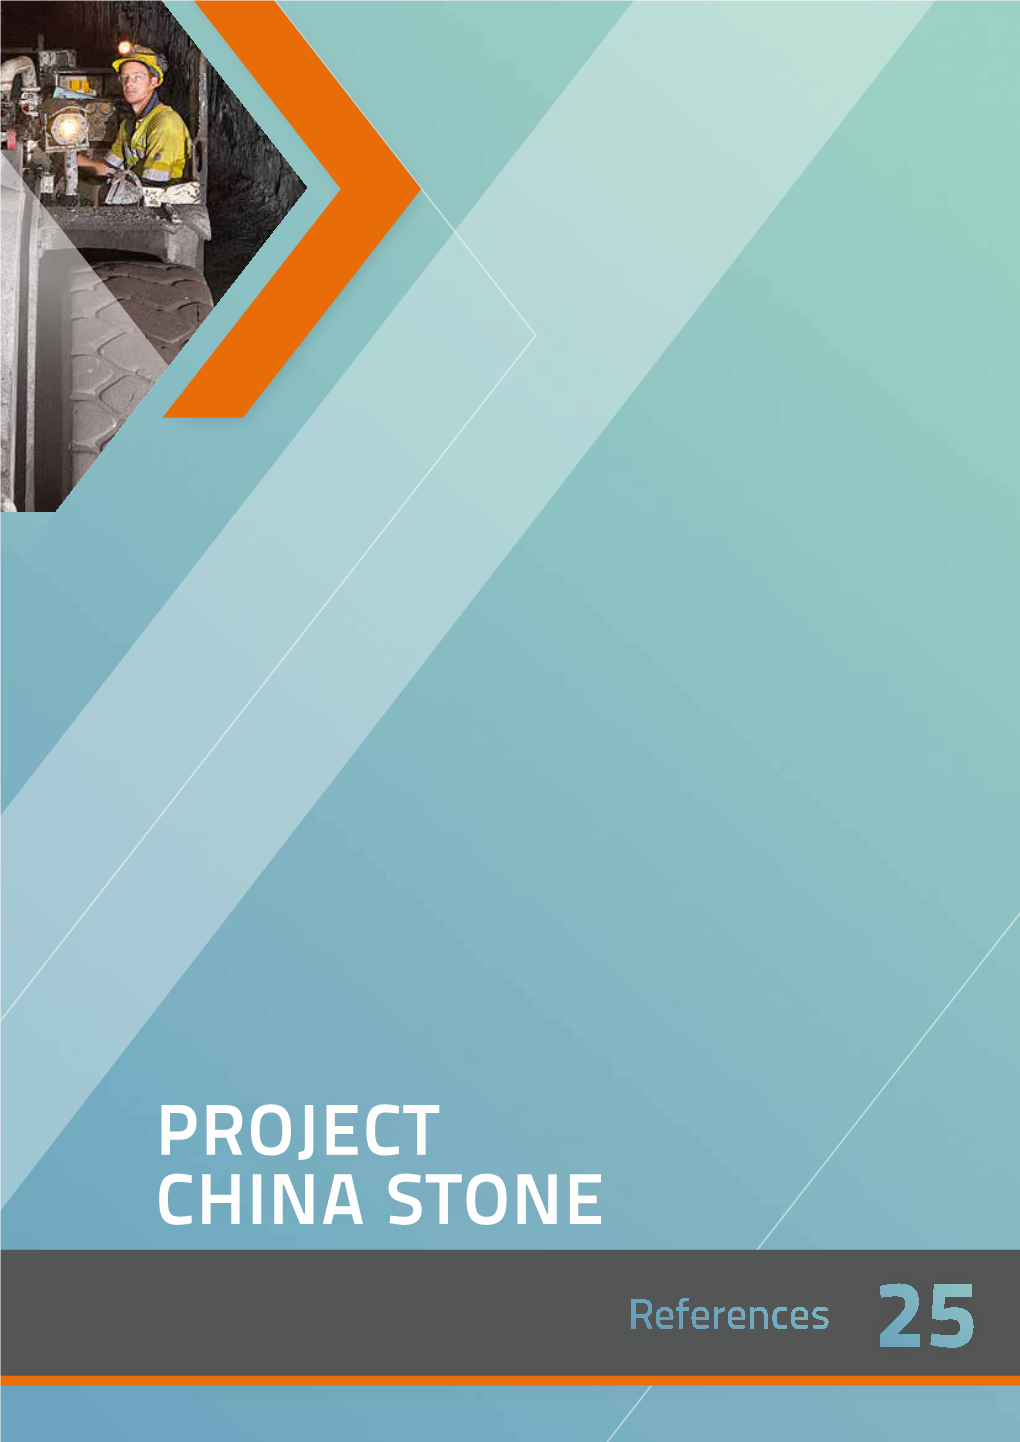 Project China Stone EIS – References